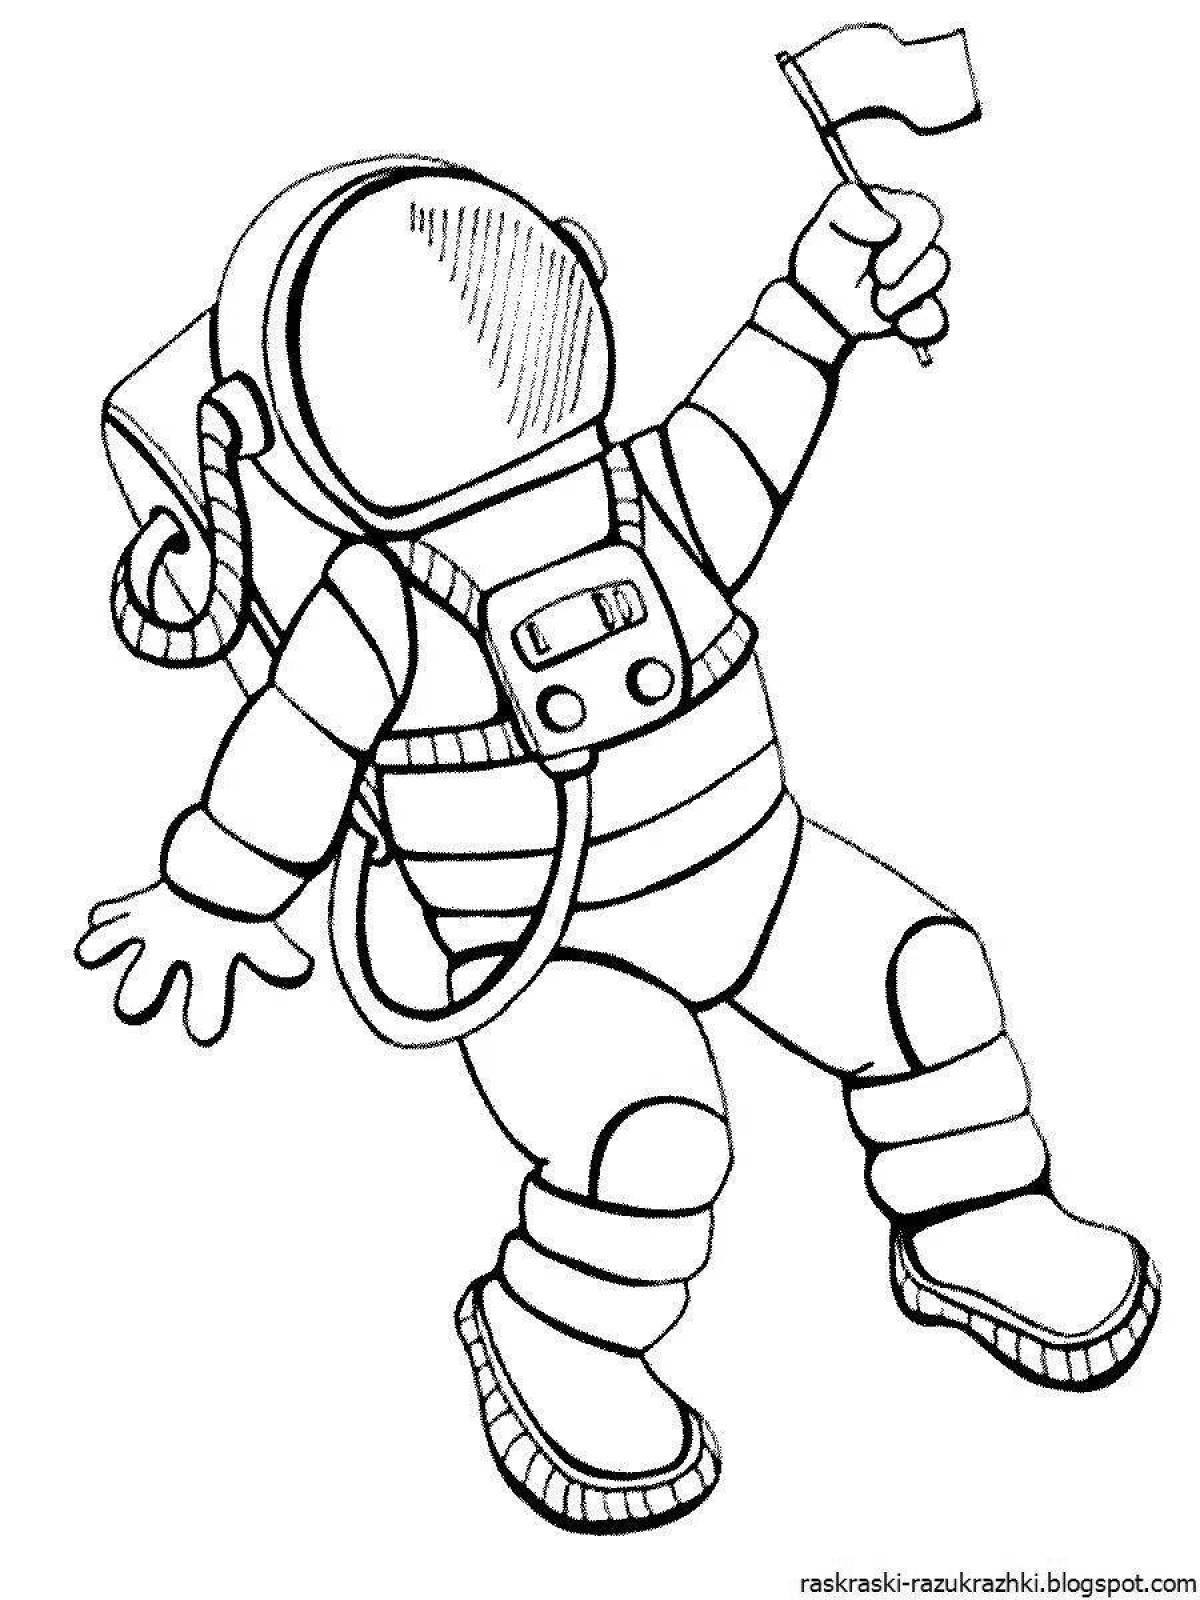 Fabulous astronaut coloring book for kids